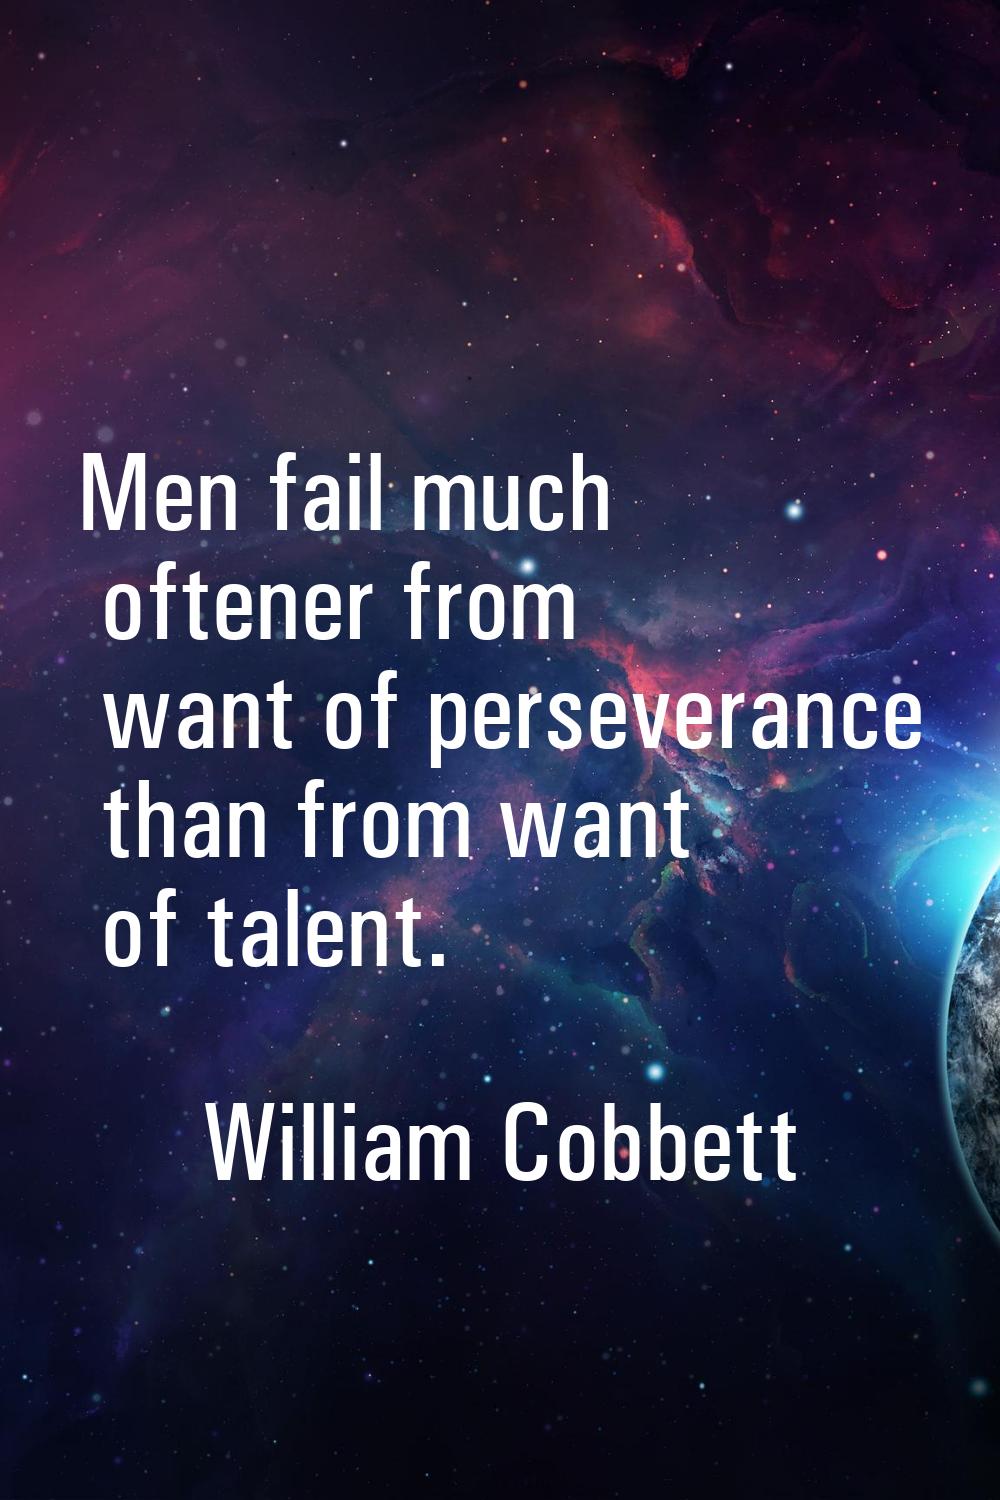 Men fail much oftener from want of perseverance than from want of talent.